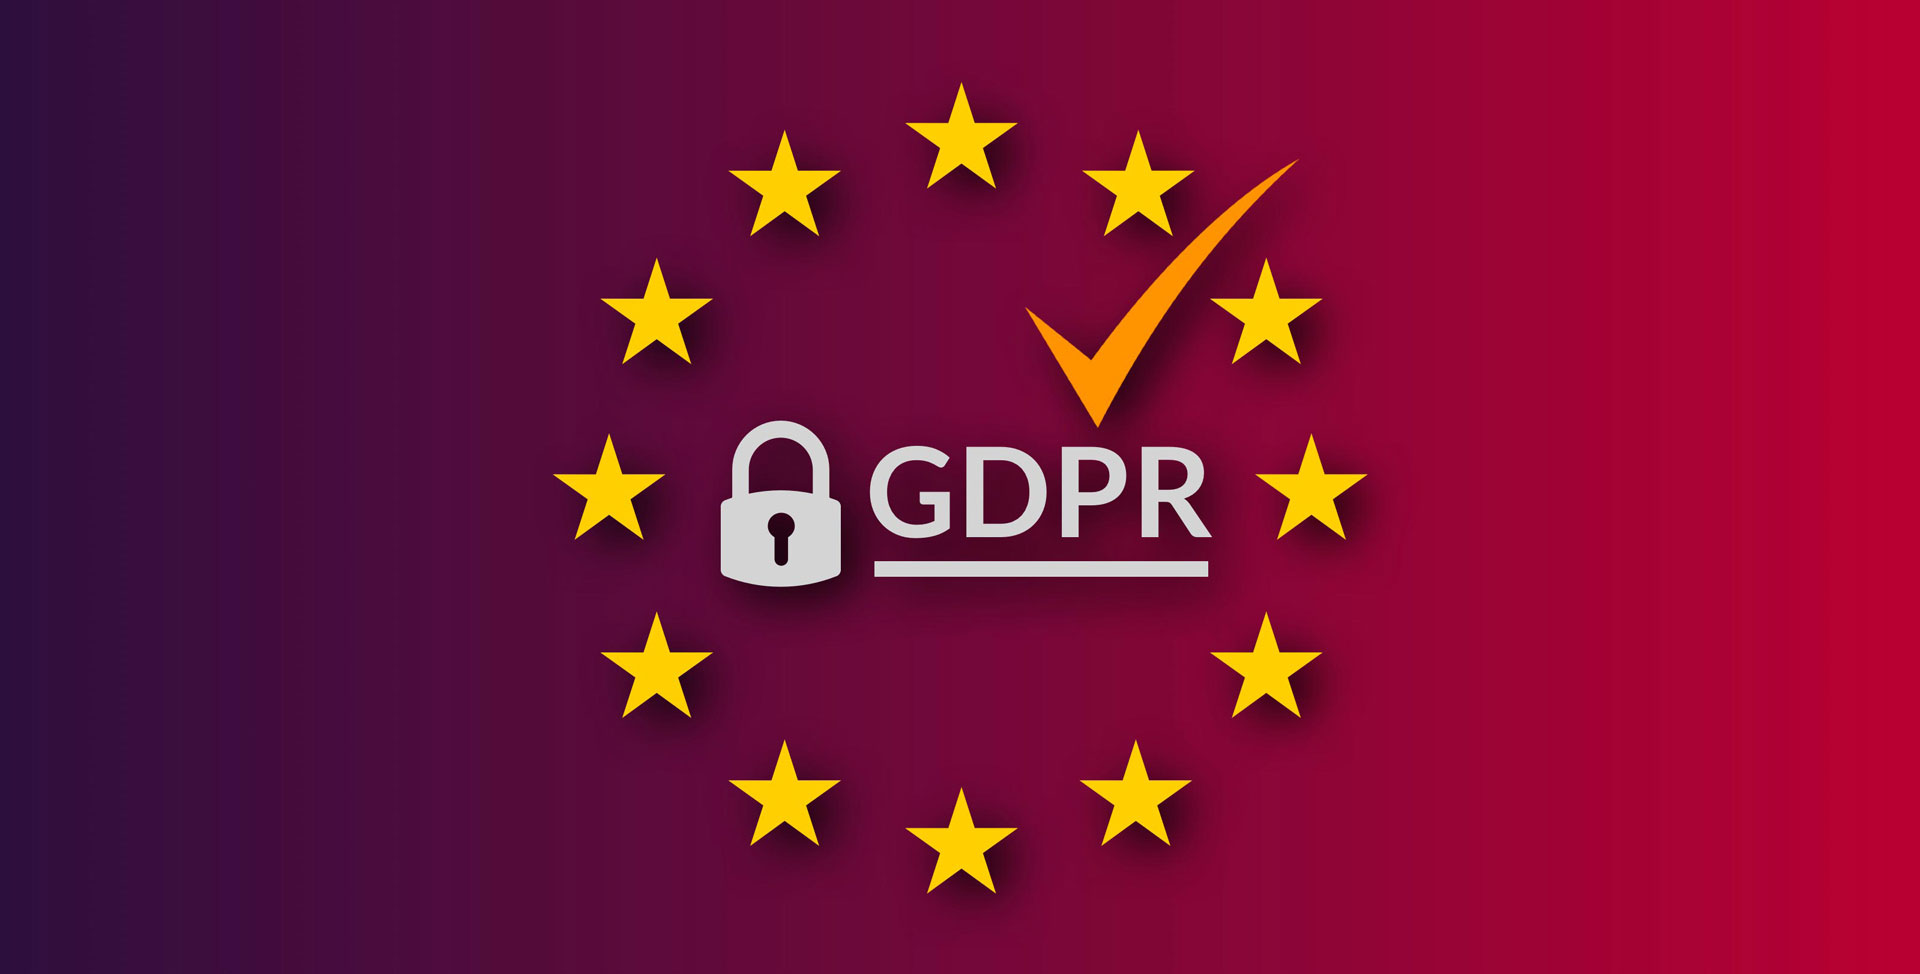 Preparing your website and your company for GDPR compliance